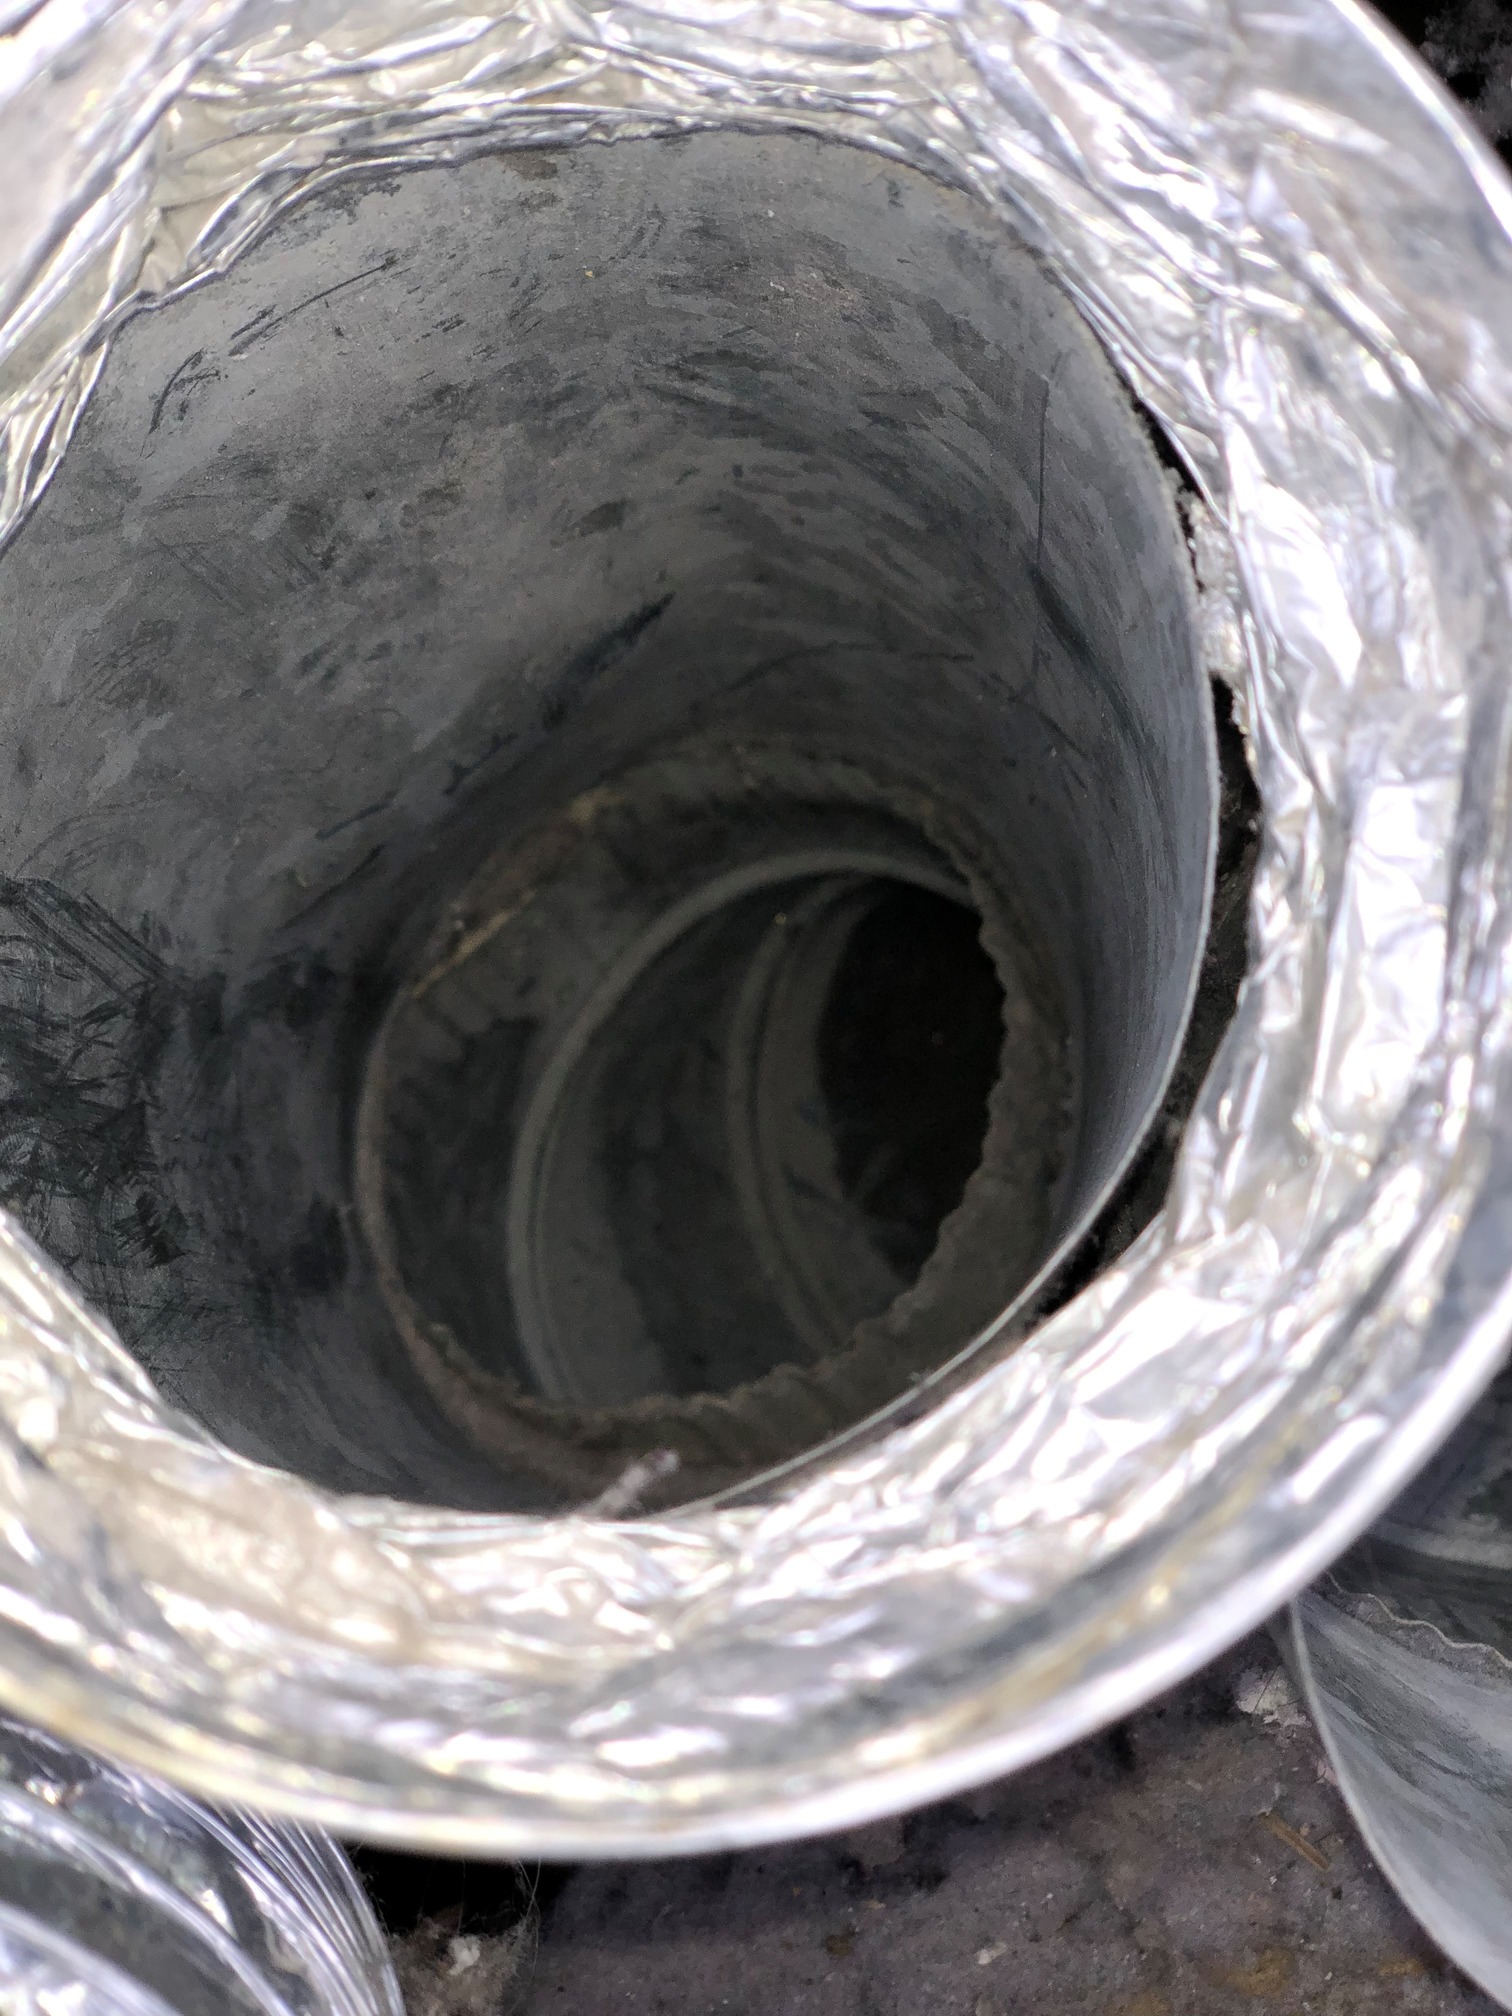 Picture showing a cleaned dryer duct with no lint inside